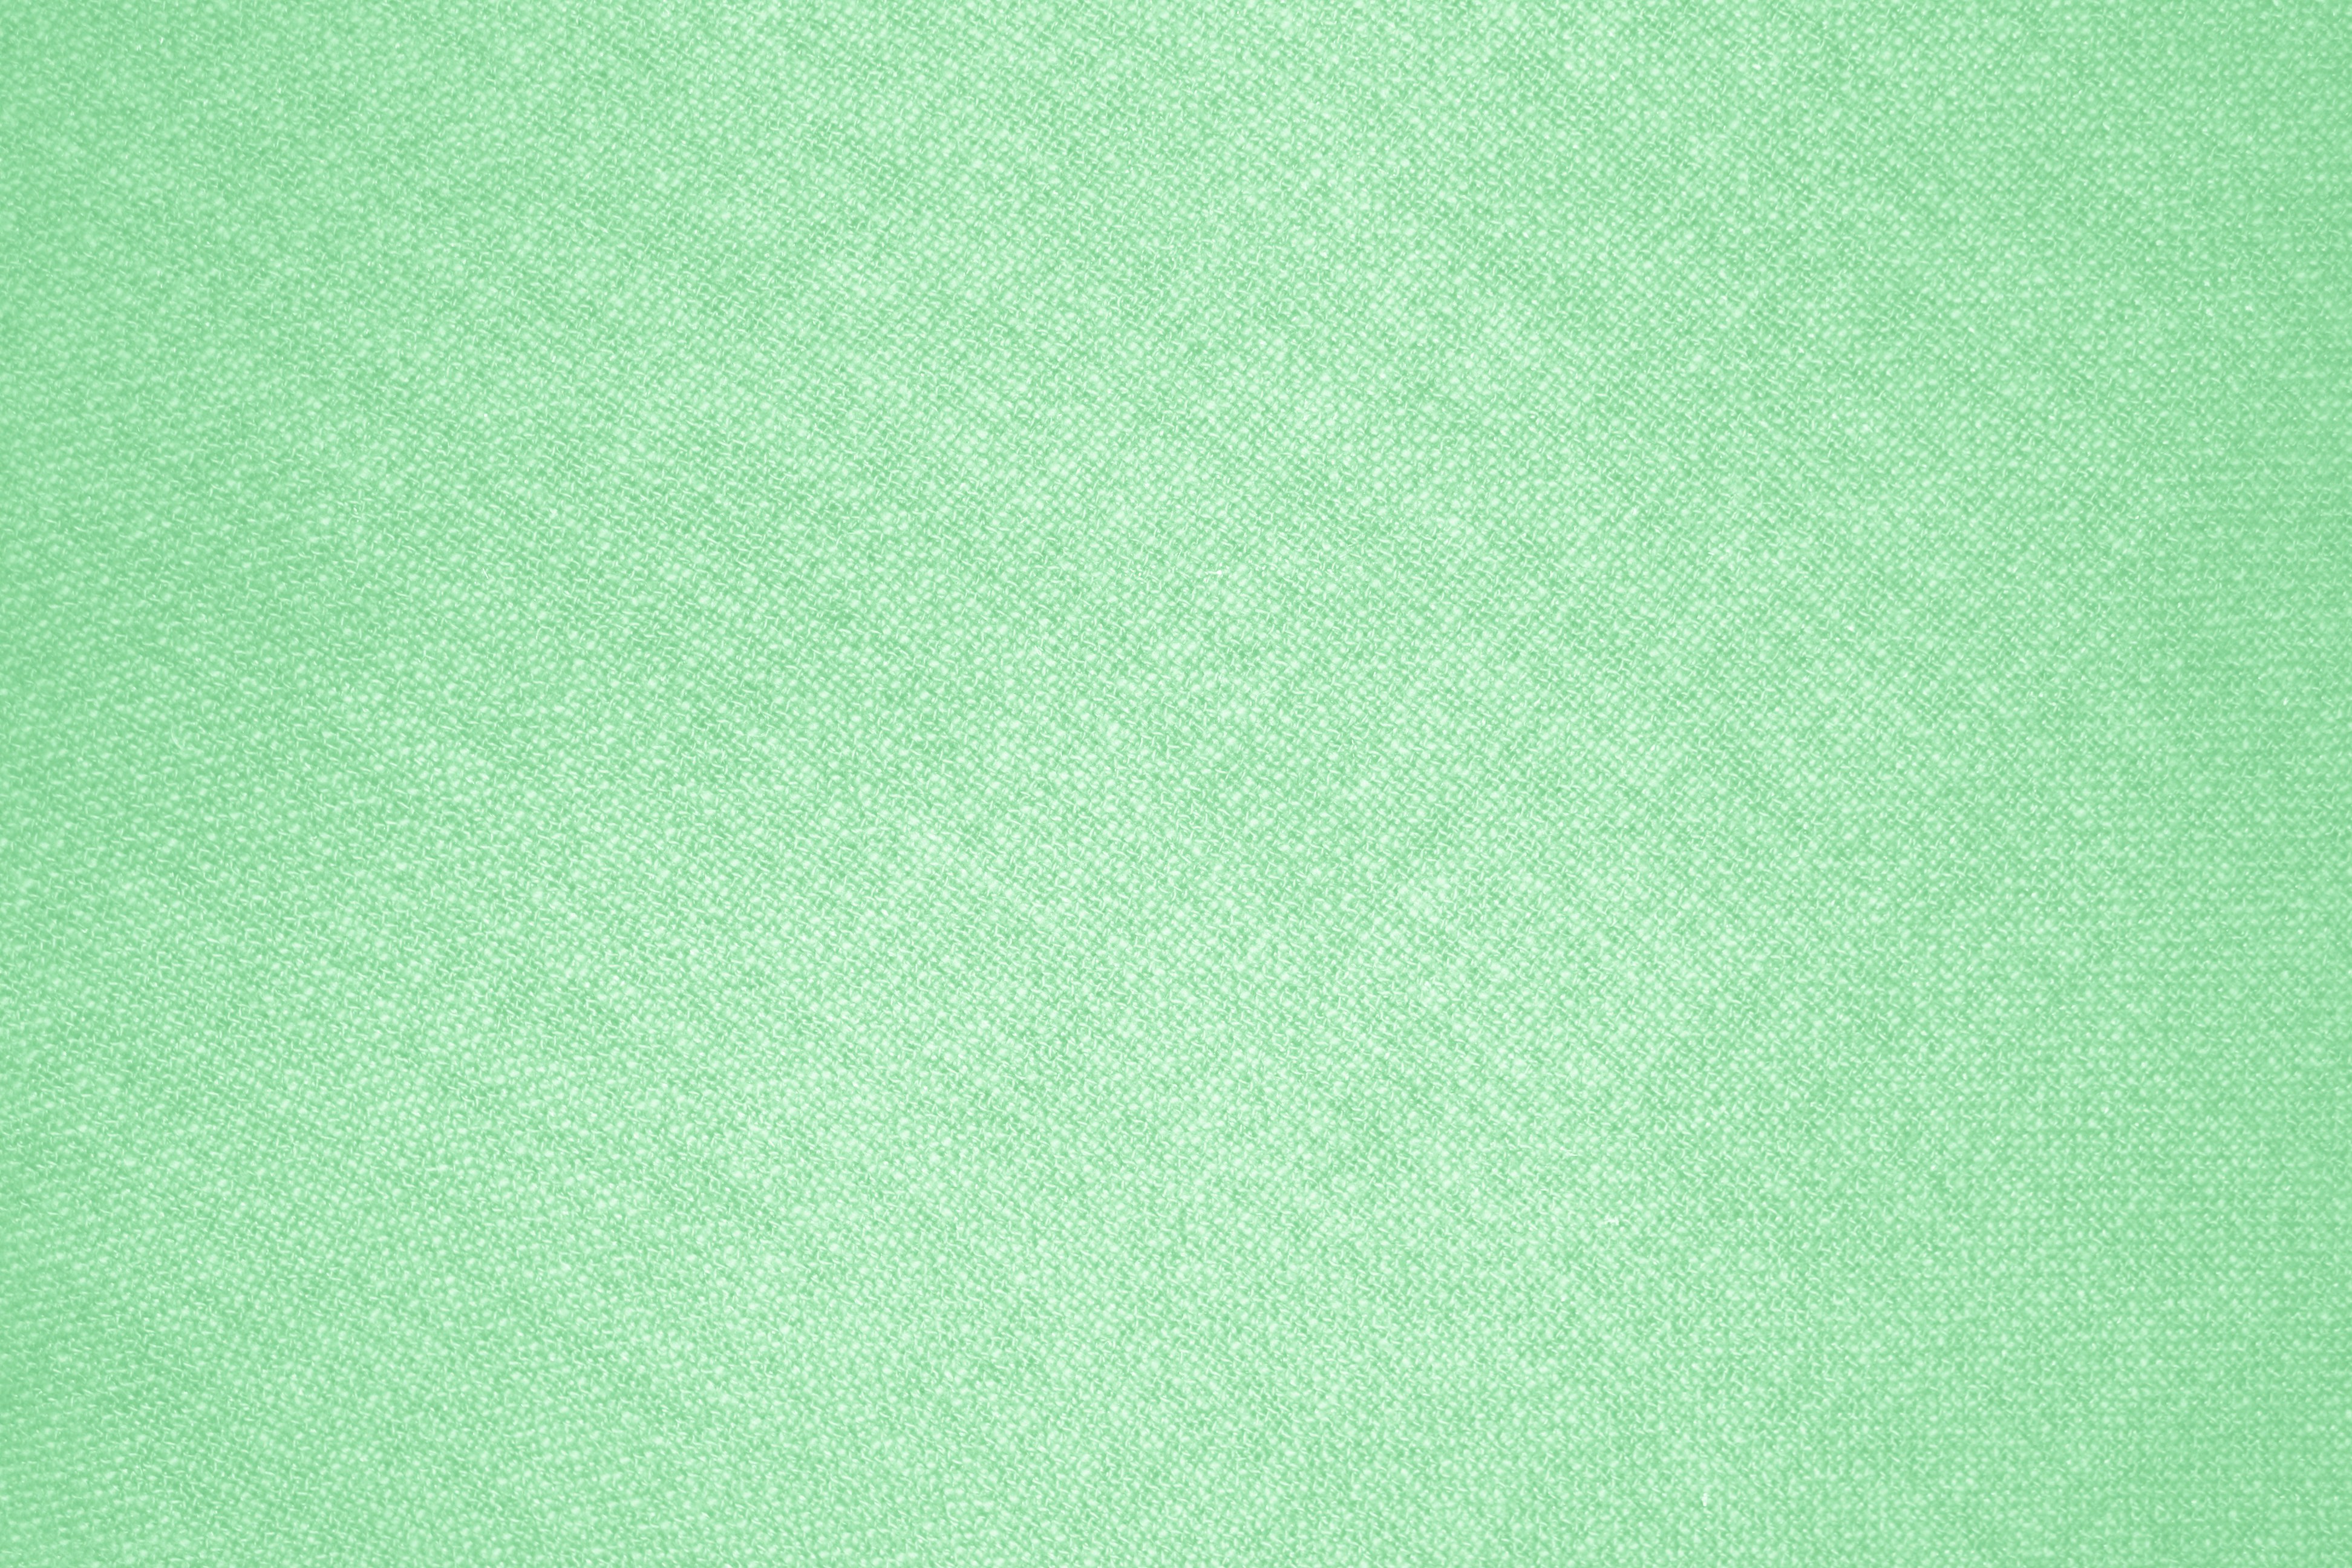 Light Green Fabric Texture Picture | Free | Photos Public Domain